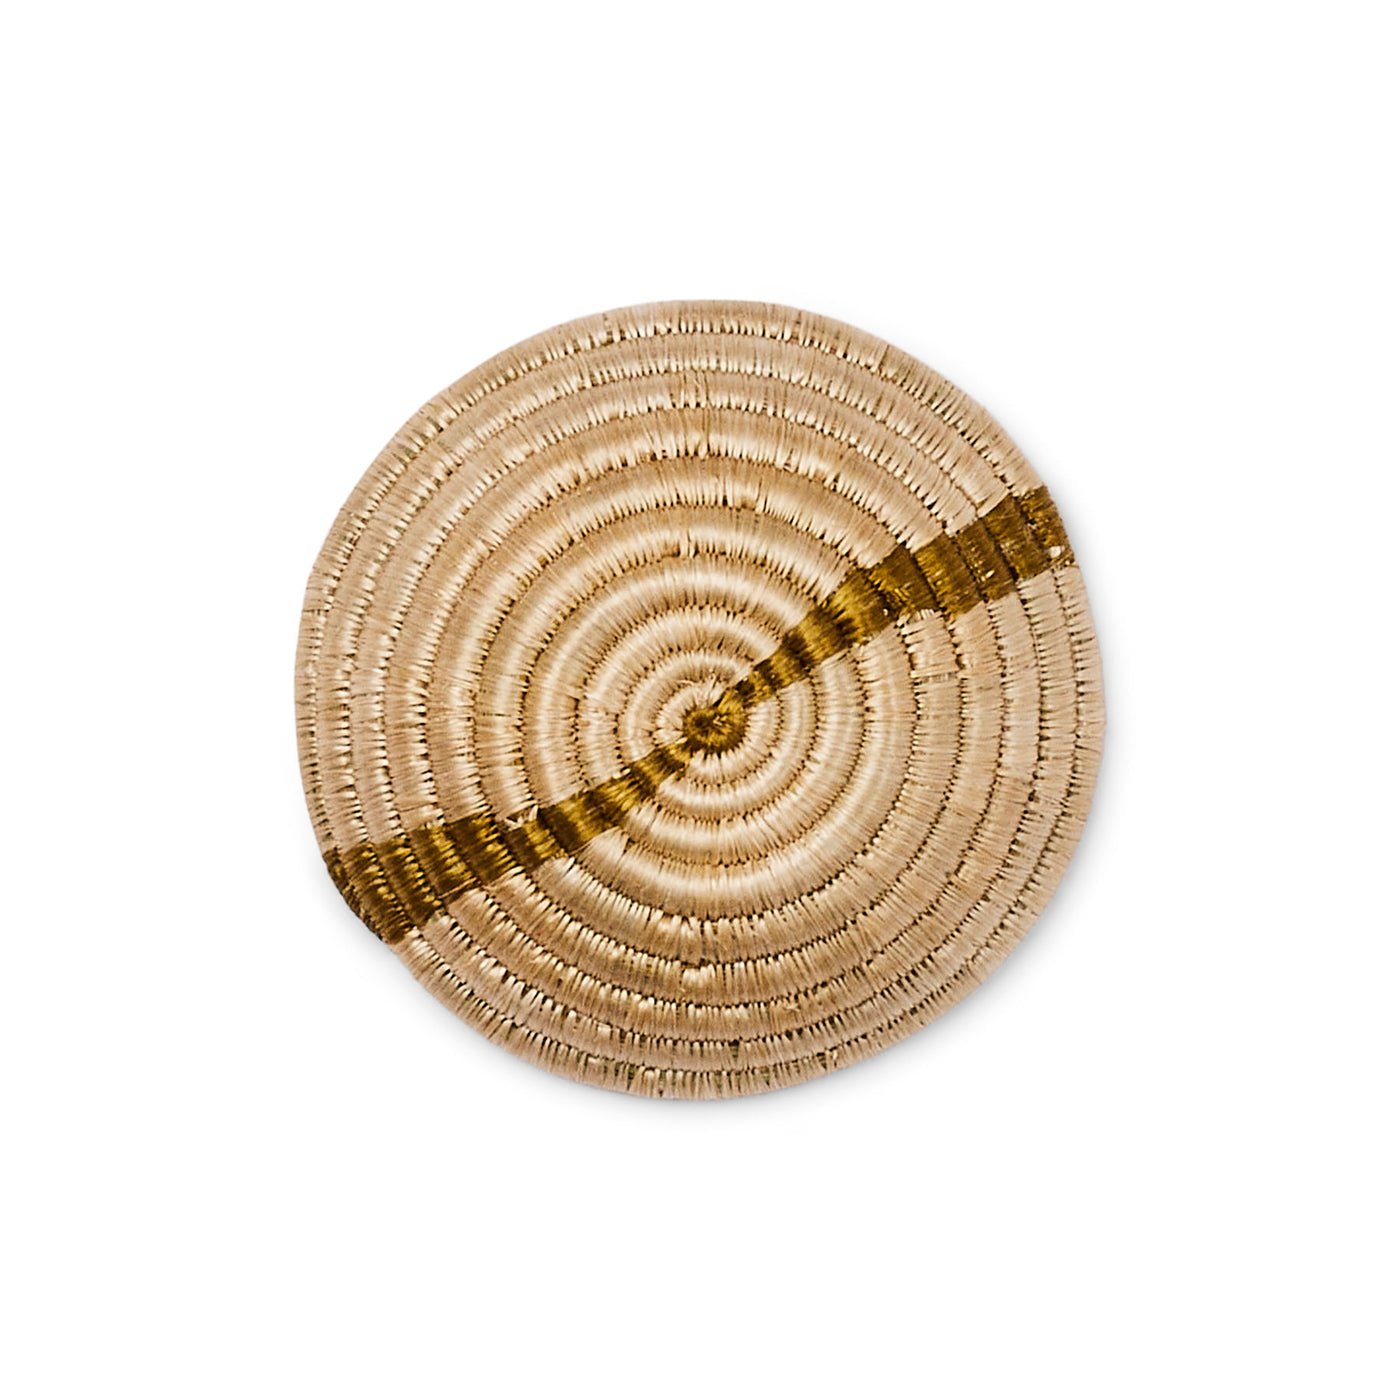 6" Small Striped Olive Round Basket